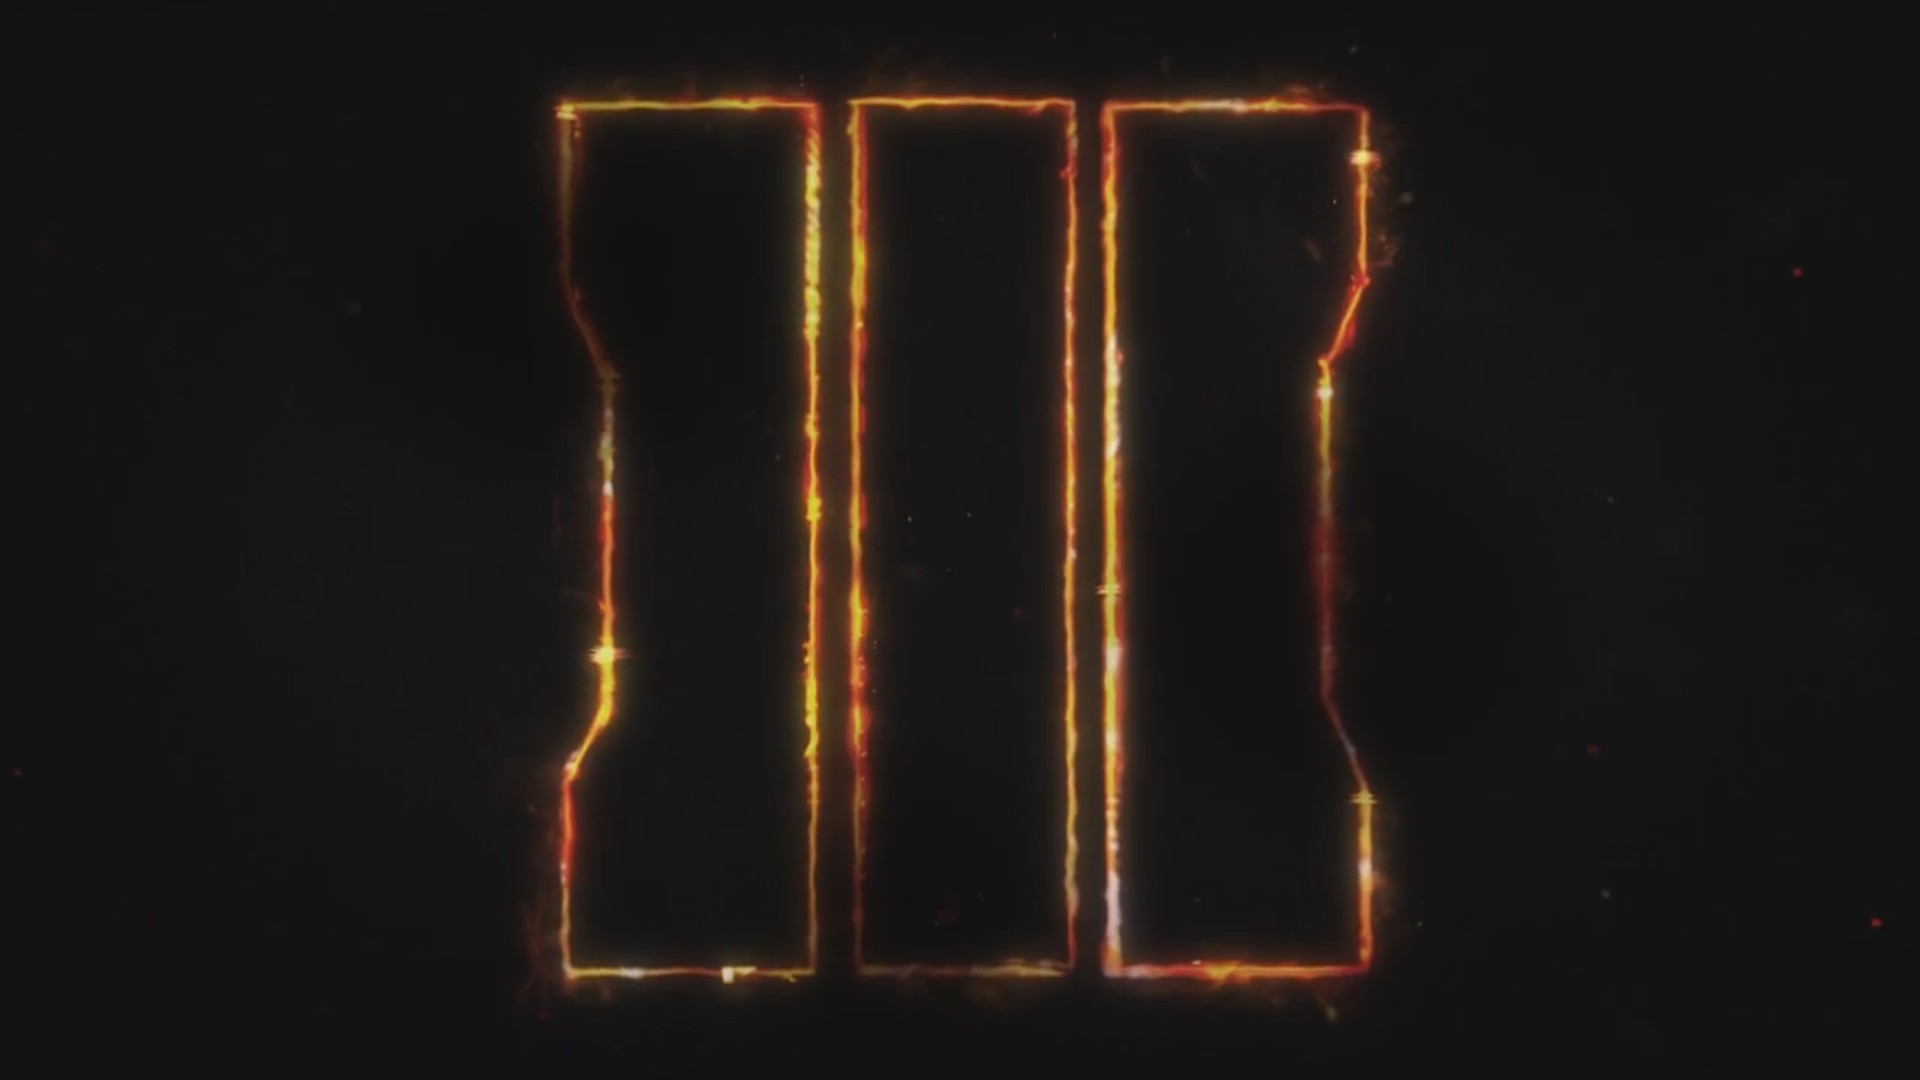 Black Ops Iii Call Of Duty Will Feature Zombie Mo